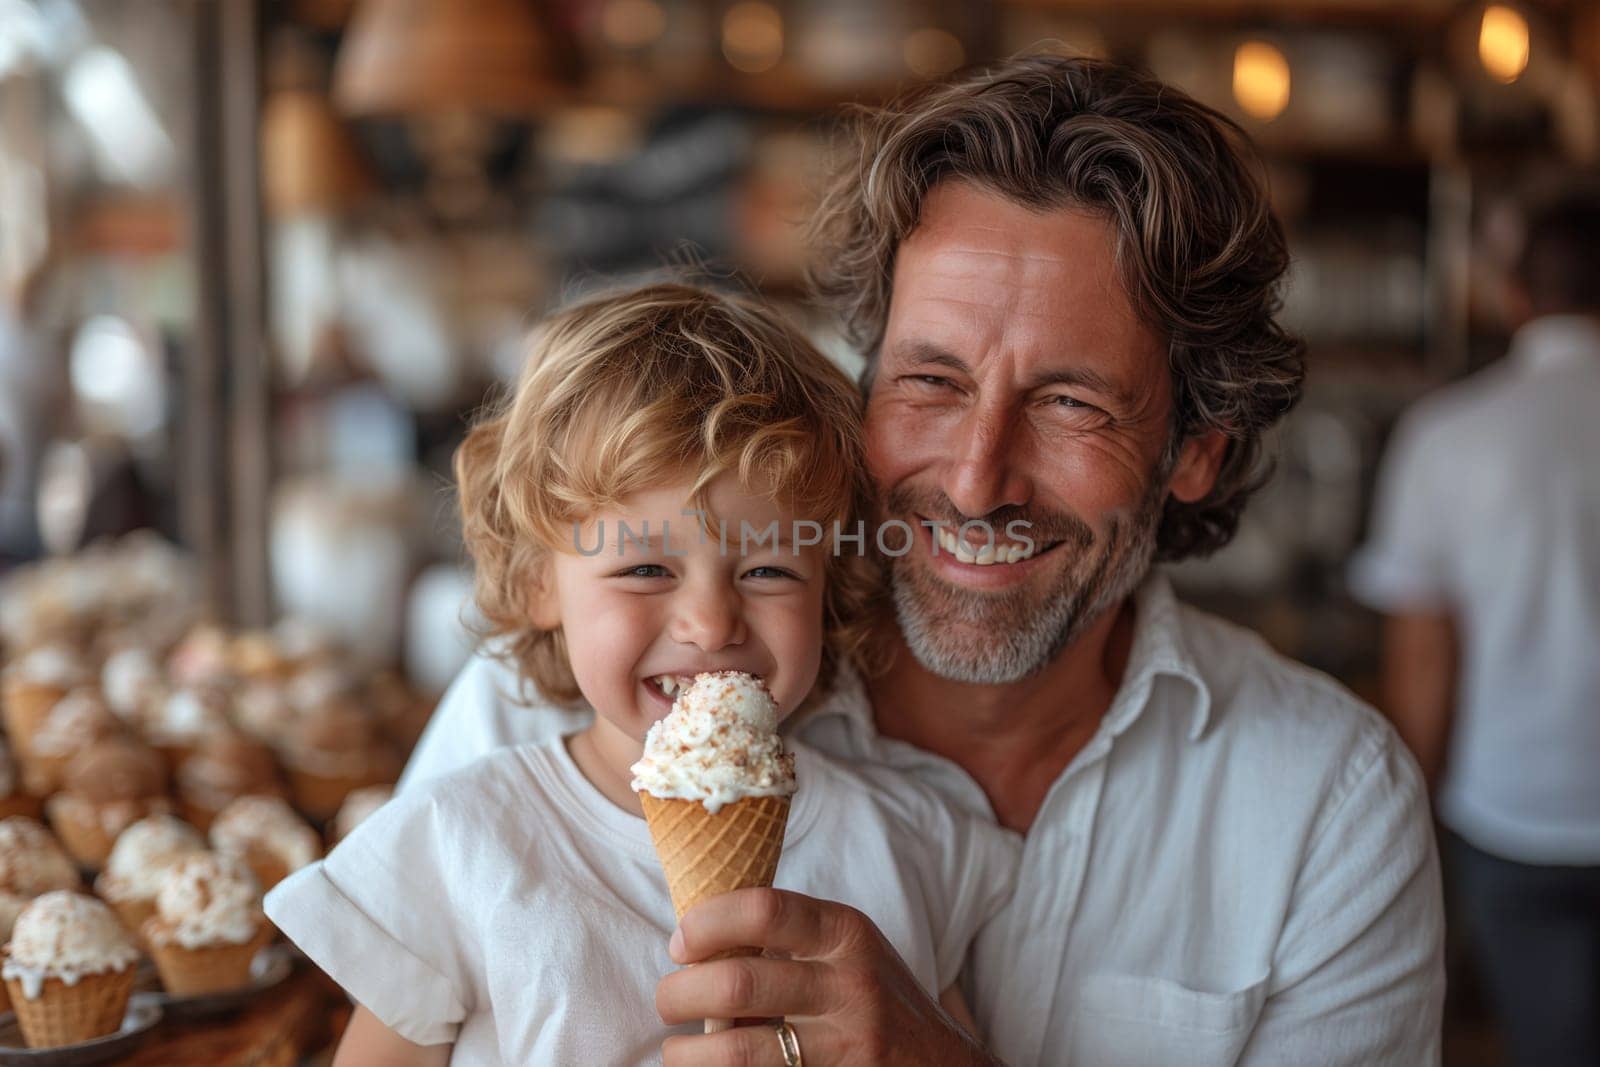 Father and son sharing ice cream together. by Sd28DimoN_1976